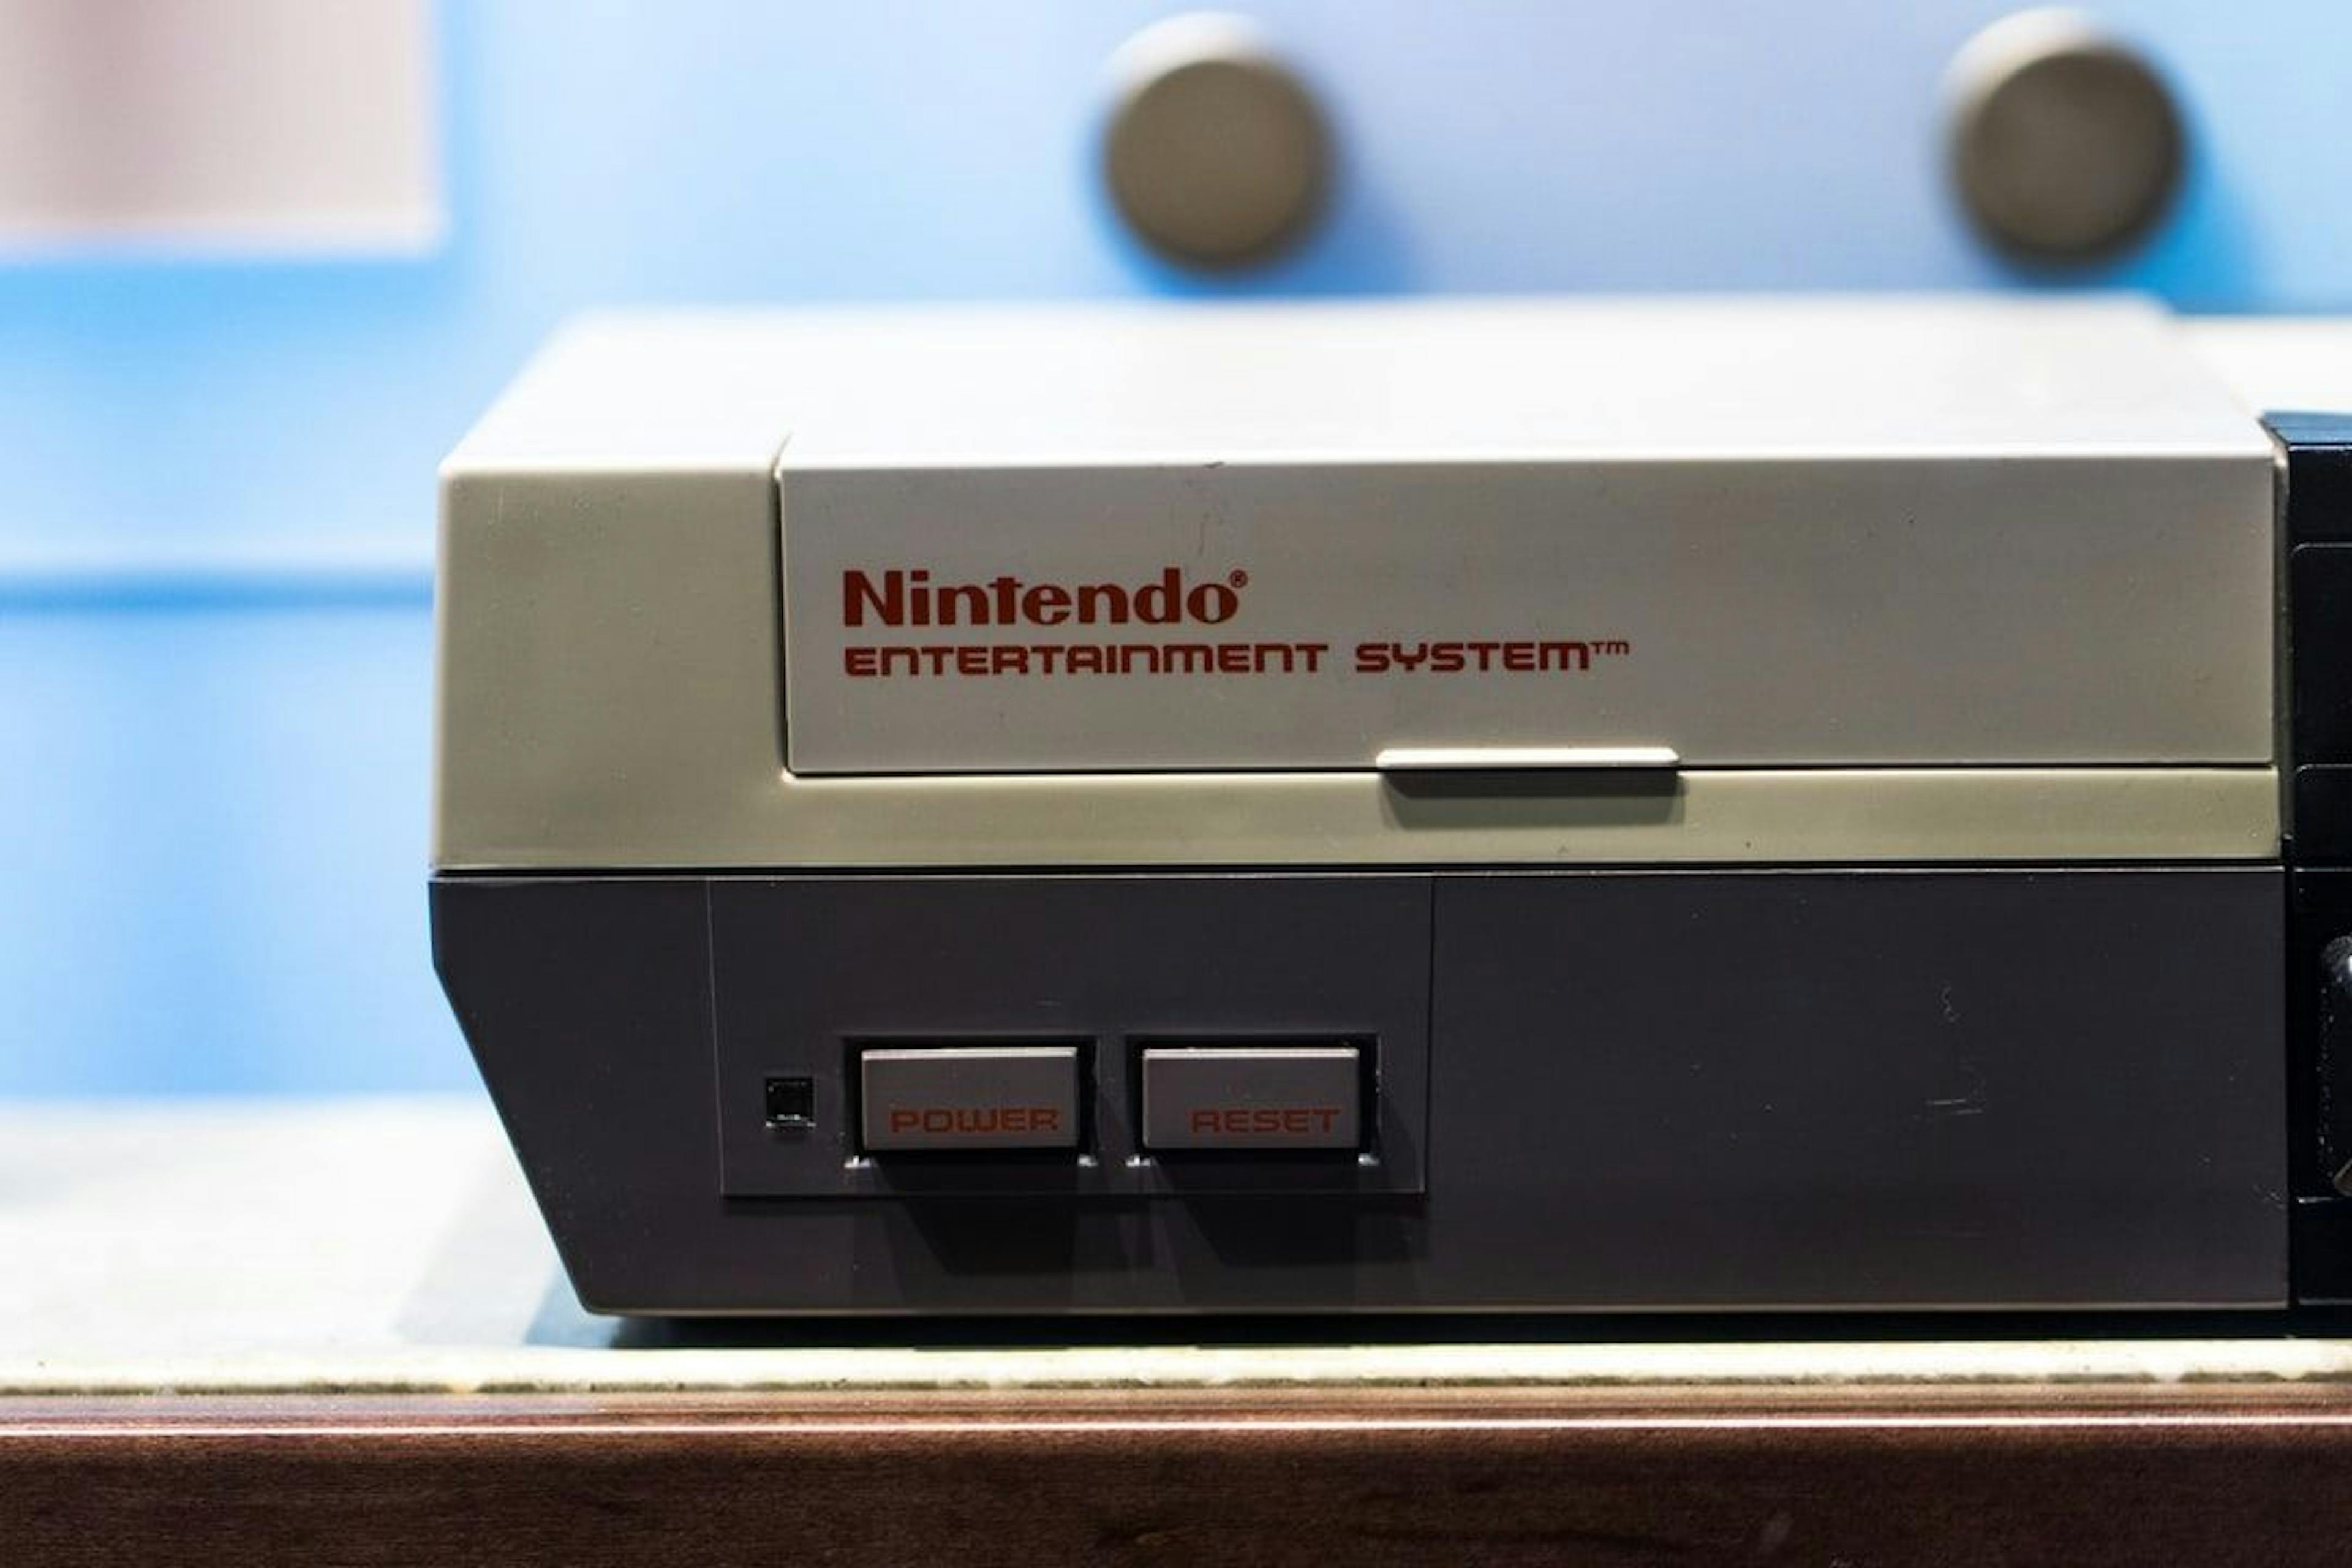 featured image - Shovelware and Asset Flipping: What Happened to Quality Control at Nintendo?